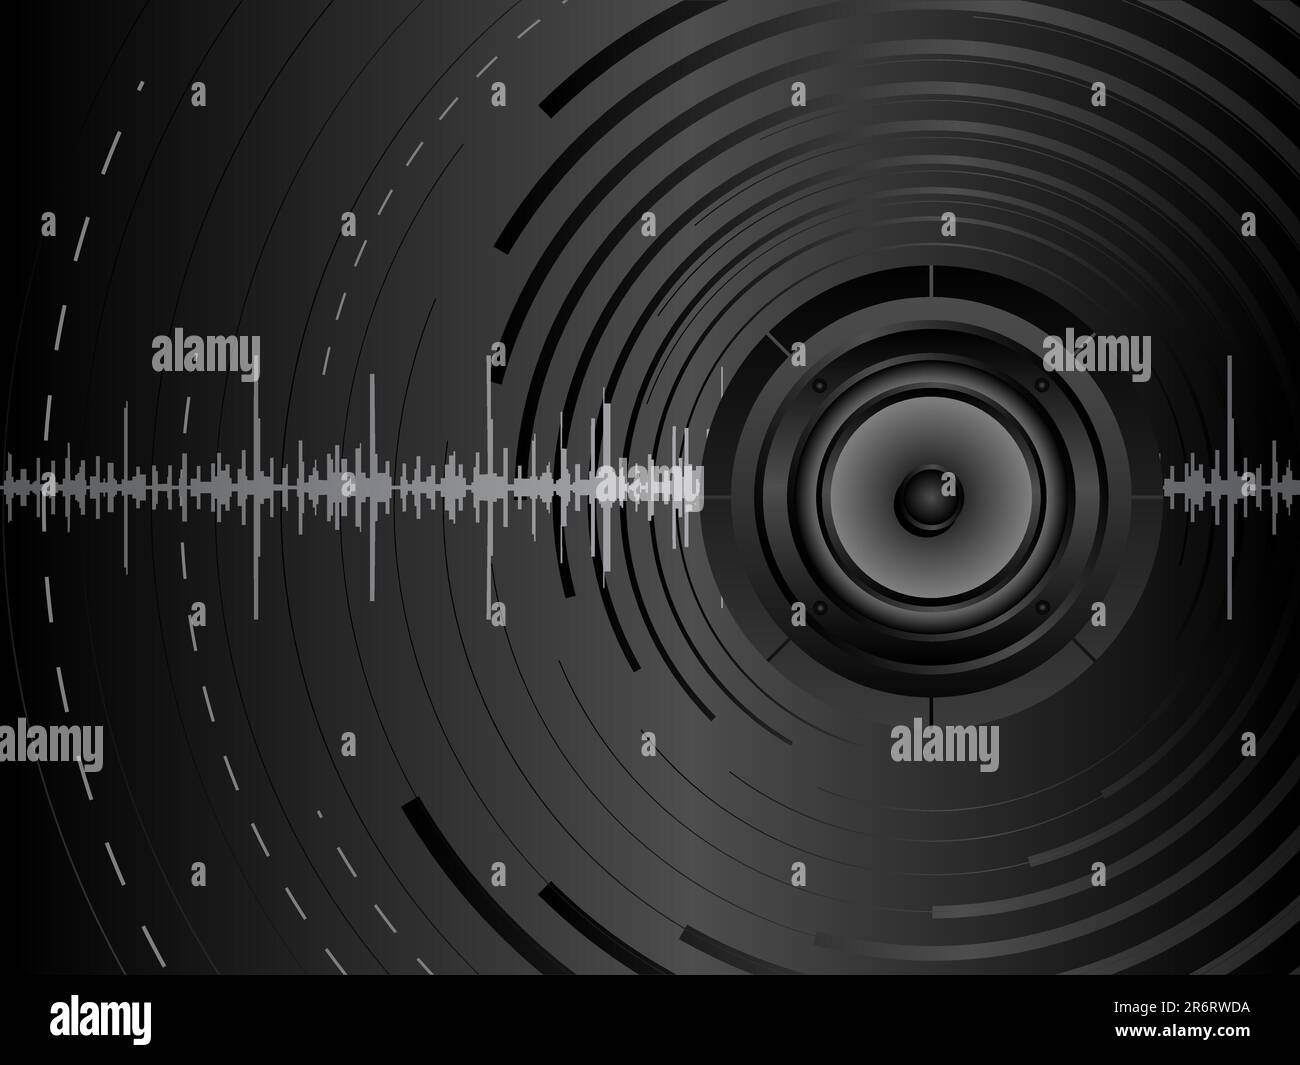 Vector abstract music background with audio speakers. Stock Vector